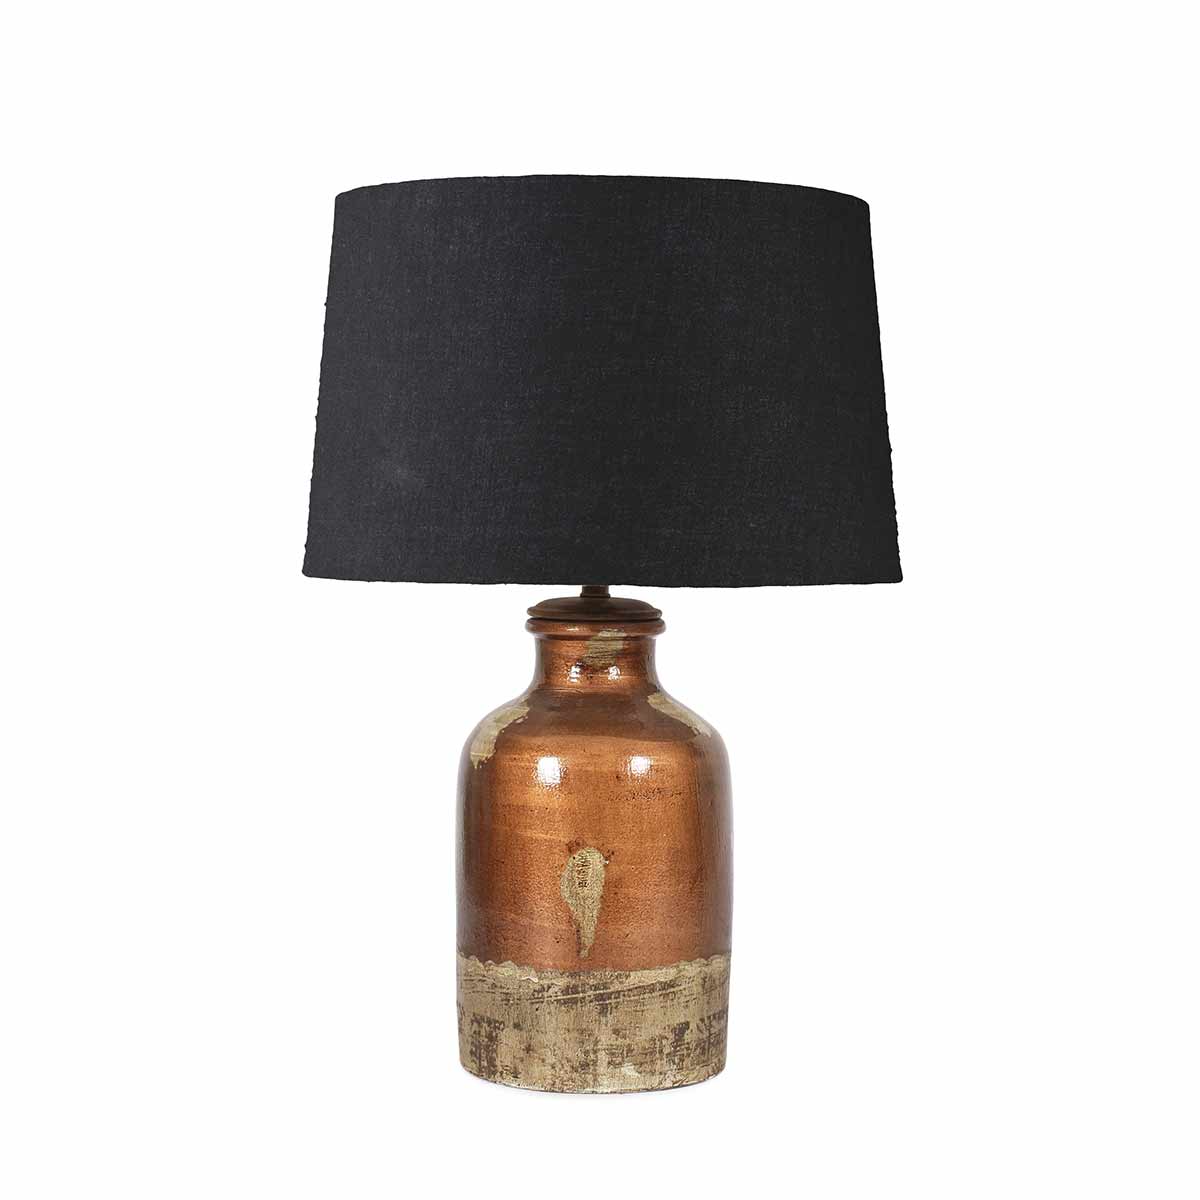 Table Lamp online